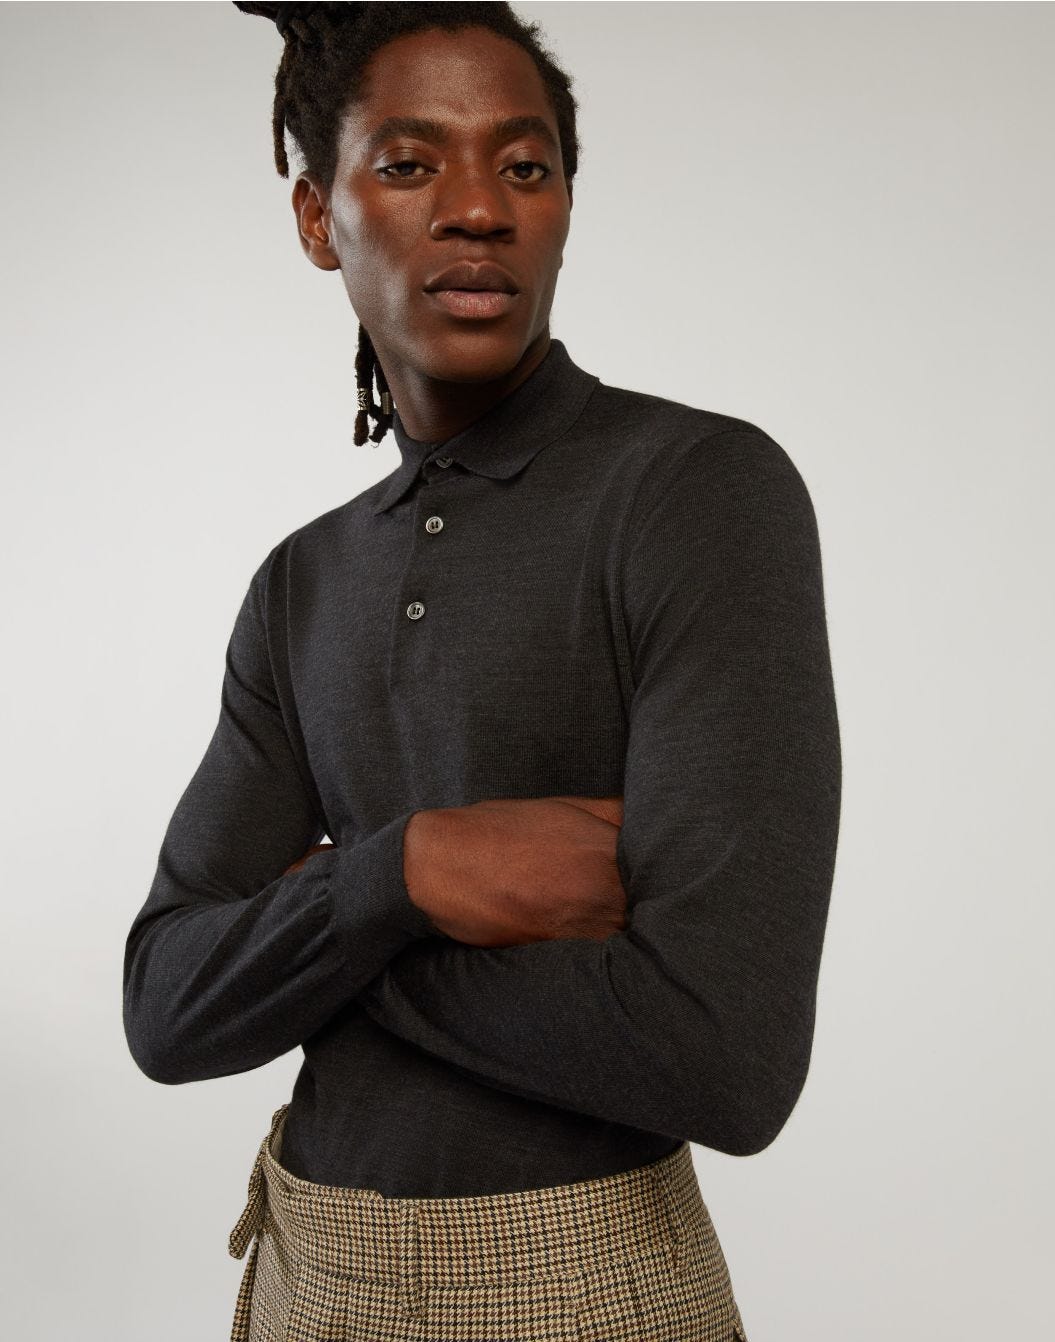 Grey polo shirt in cashmere, wool and silk